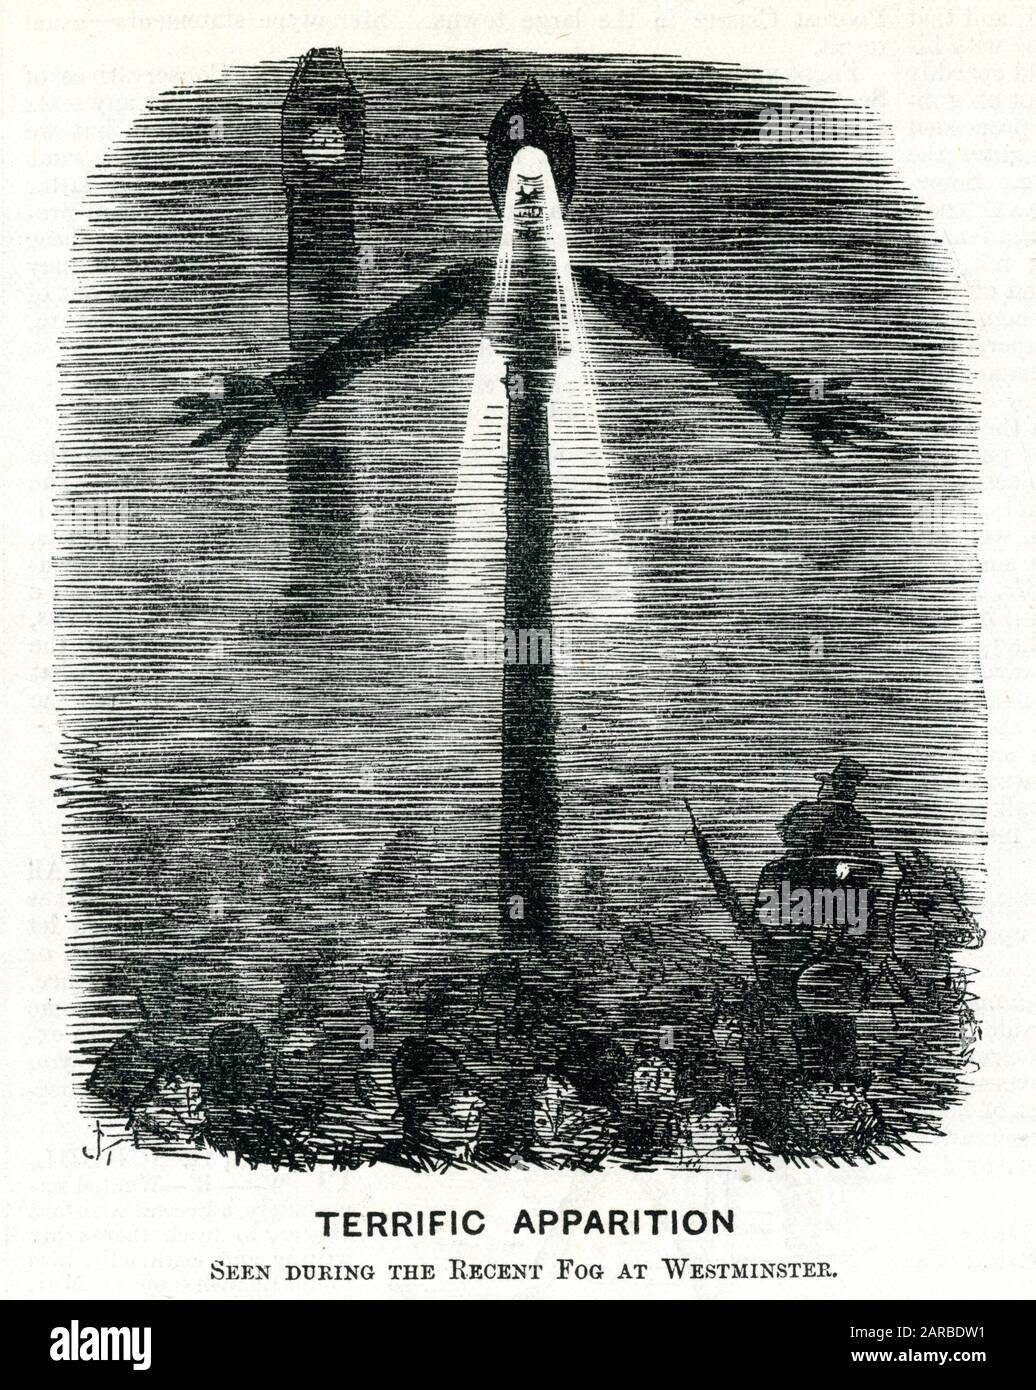 Cartoon, Terrific Apparition - Seen during the recent fog at Westminster. A satire on London's First Traffic Light. Invented by J P Knight, a railway signalling engineer, it was installed outside the Houses of Parliament in 1868 and looked like any railway signal of the time, with waving semaphore arms and red-green lamps, operated by gas, for night use. Unfortunately, it exploded as a result of a leak in one of the gas lines underneath the pavement, injuring the policeman operator. Stock Photo